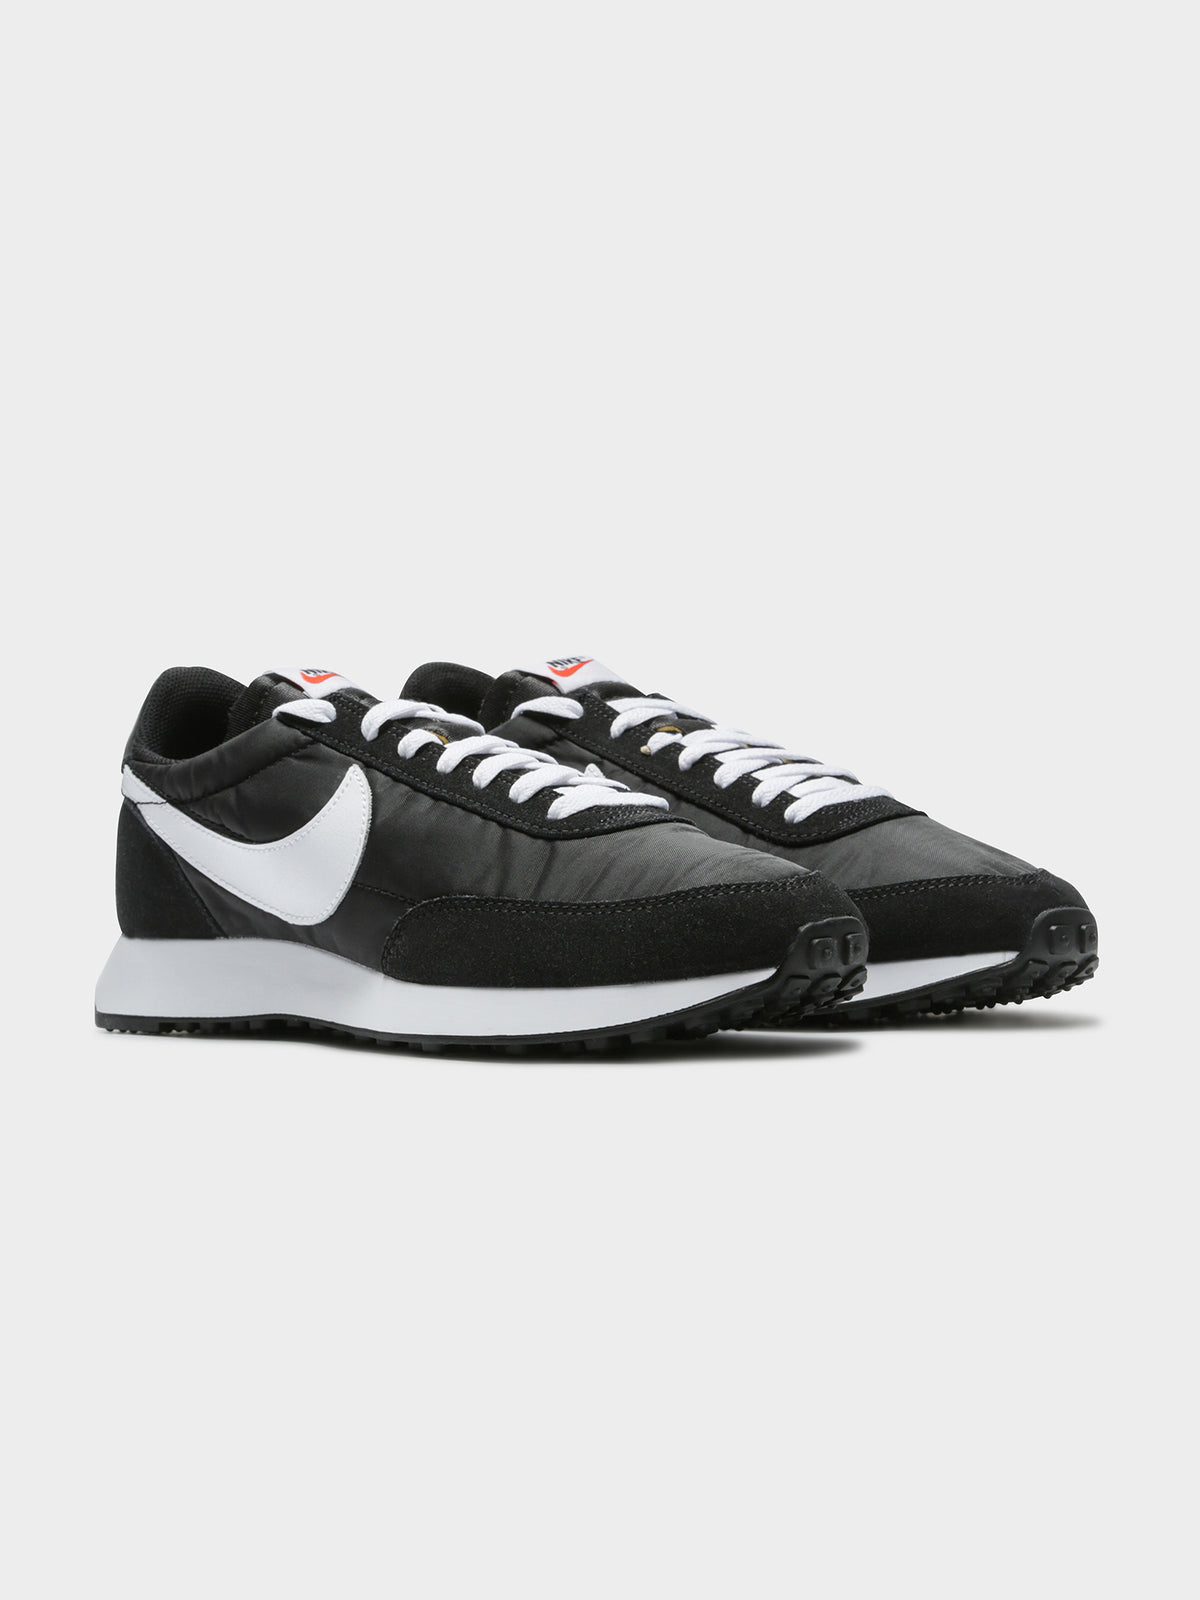 Unisex Air Tailwind 79 Sneakers in Black &amp; White